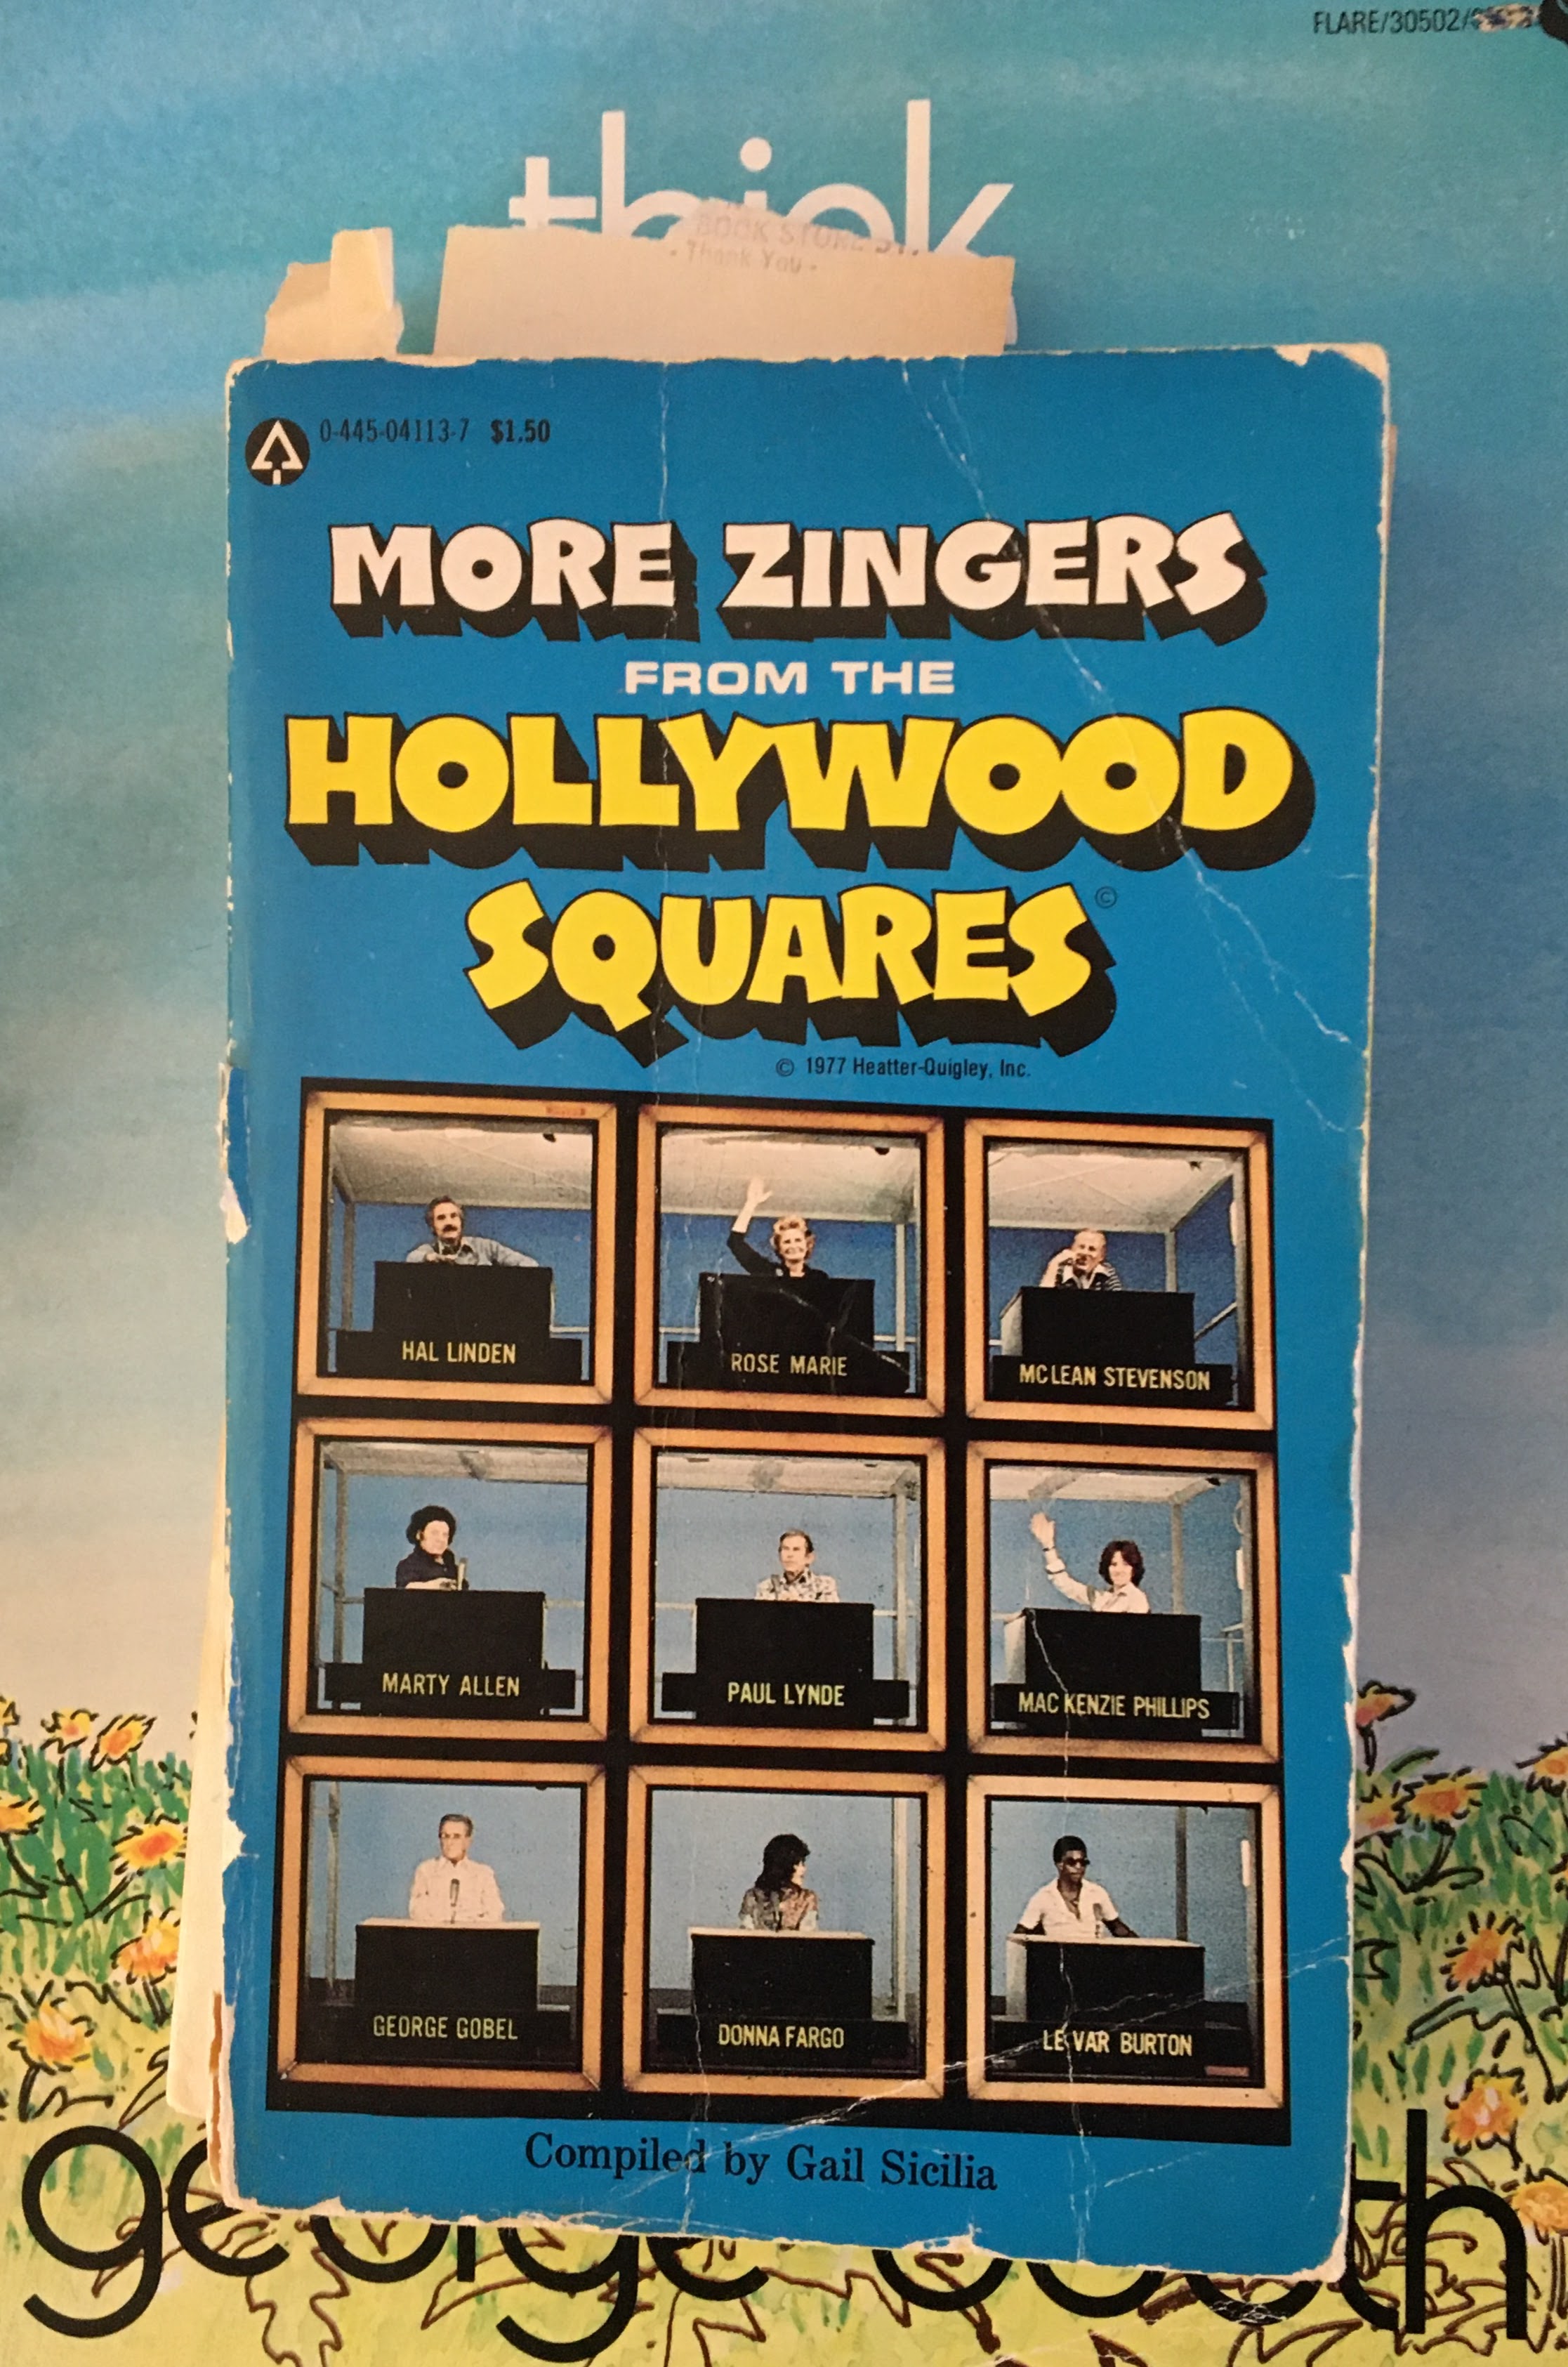 More Zingers From The Hollywood Squares paperback